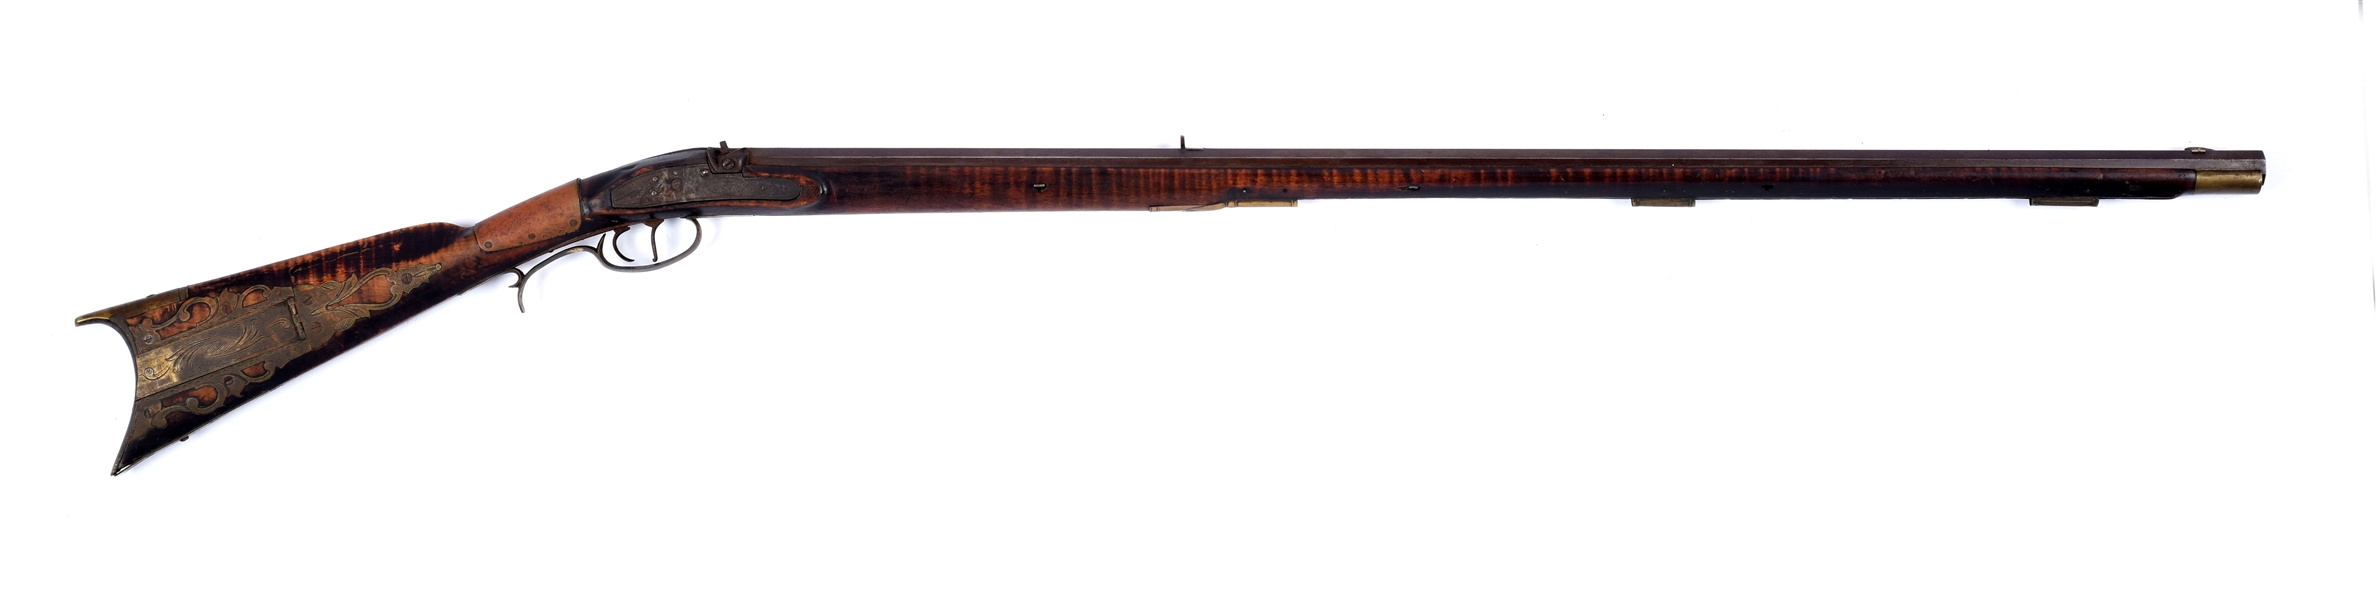 (A) SIGNED PITTSBURGH KENTUCKY LONGRIFLE BY FLEEGER.